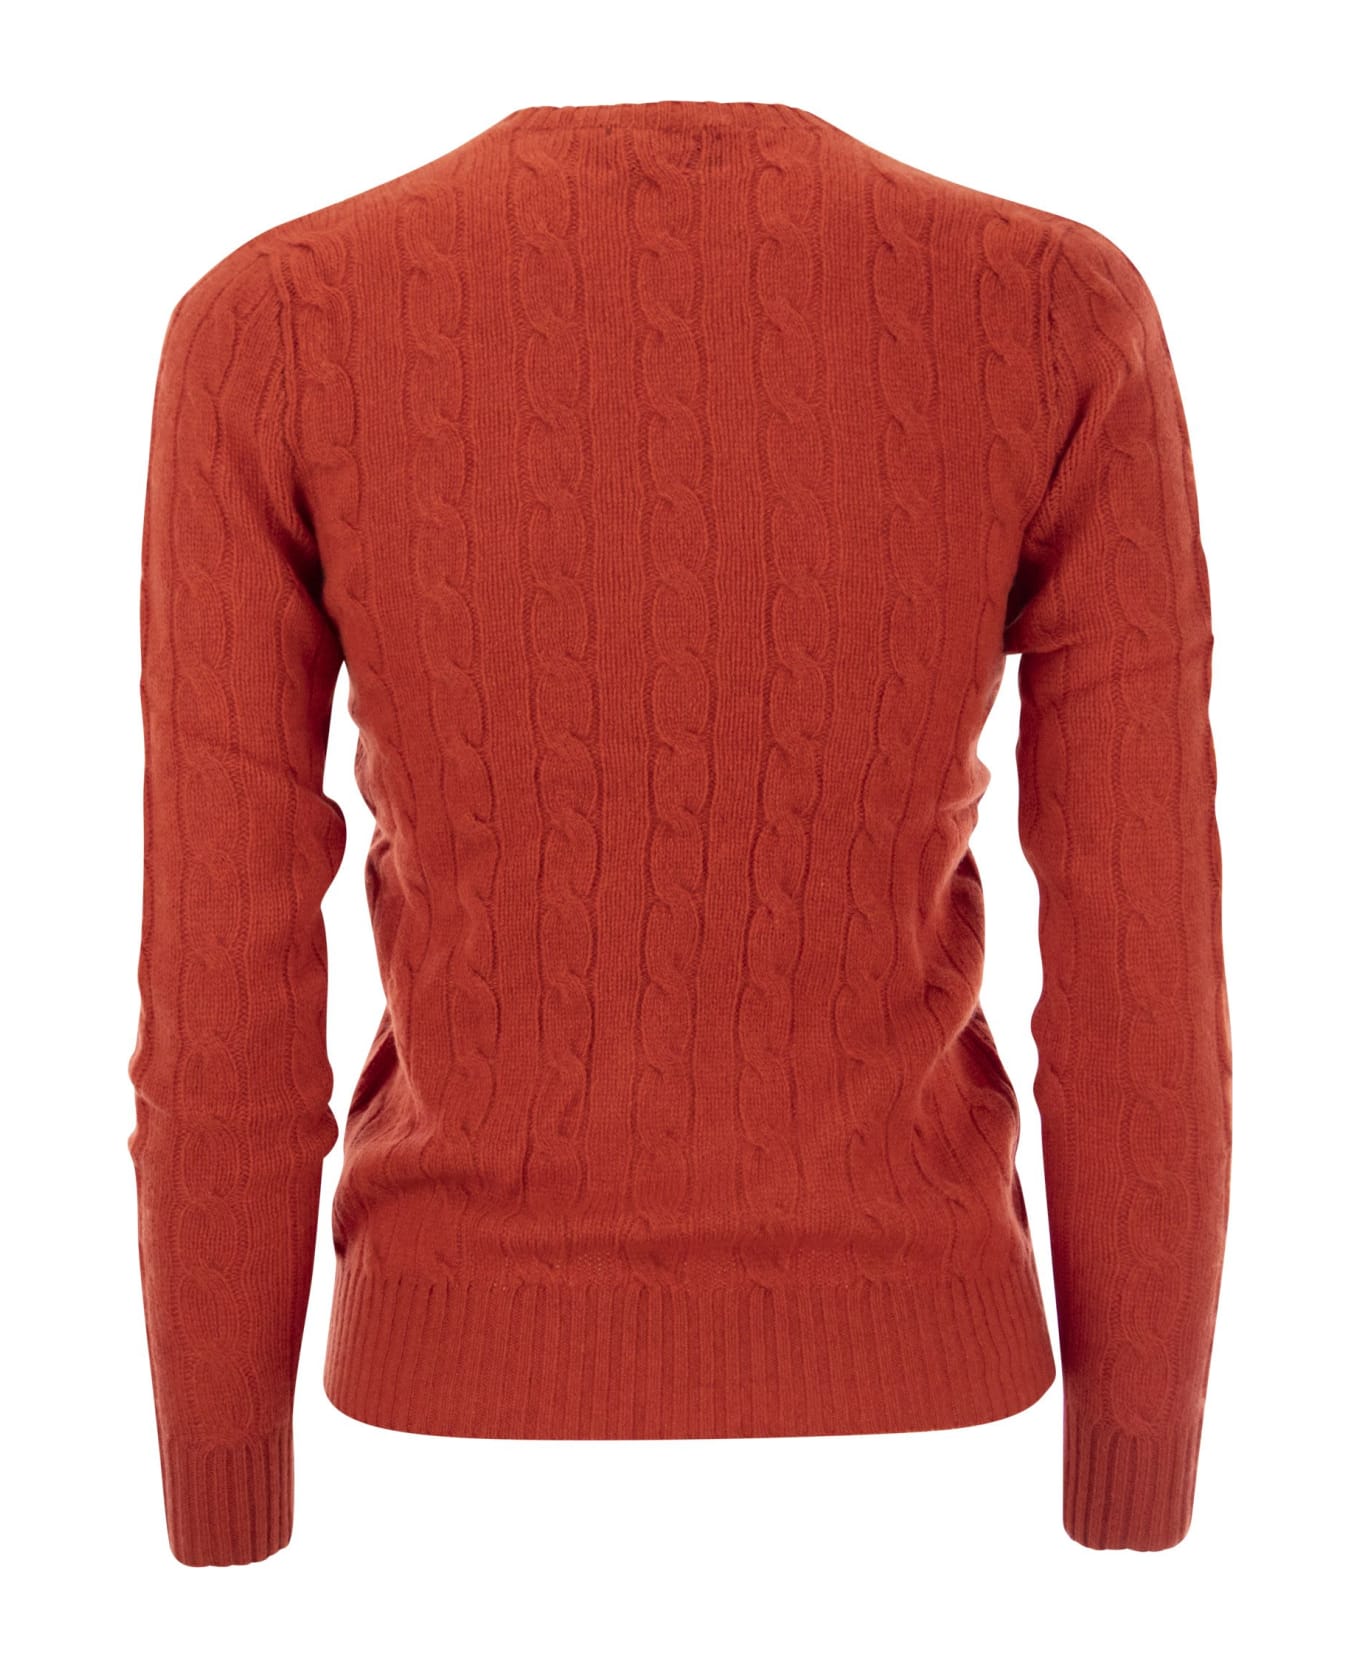 Polo Ralph Lauren Faded Red Wool And Cashmere Braided Sweater - Orange